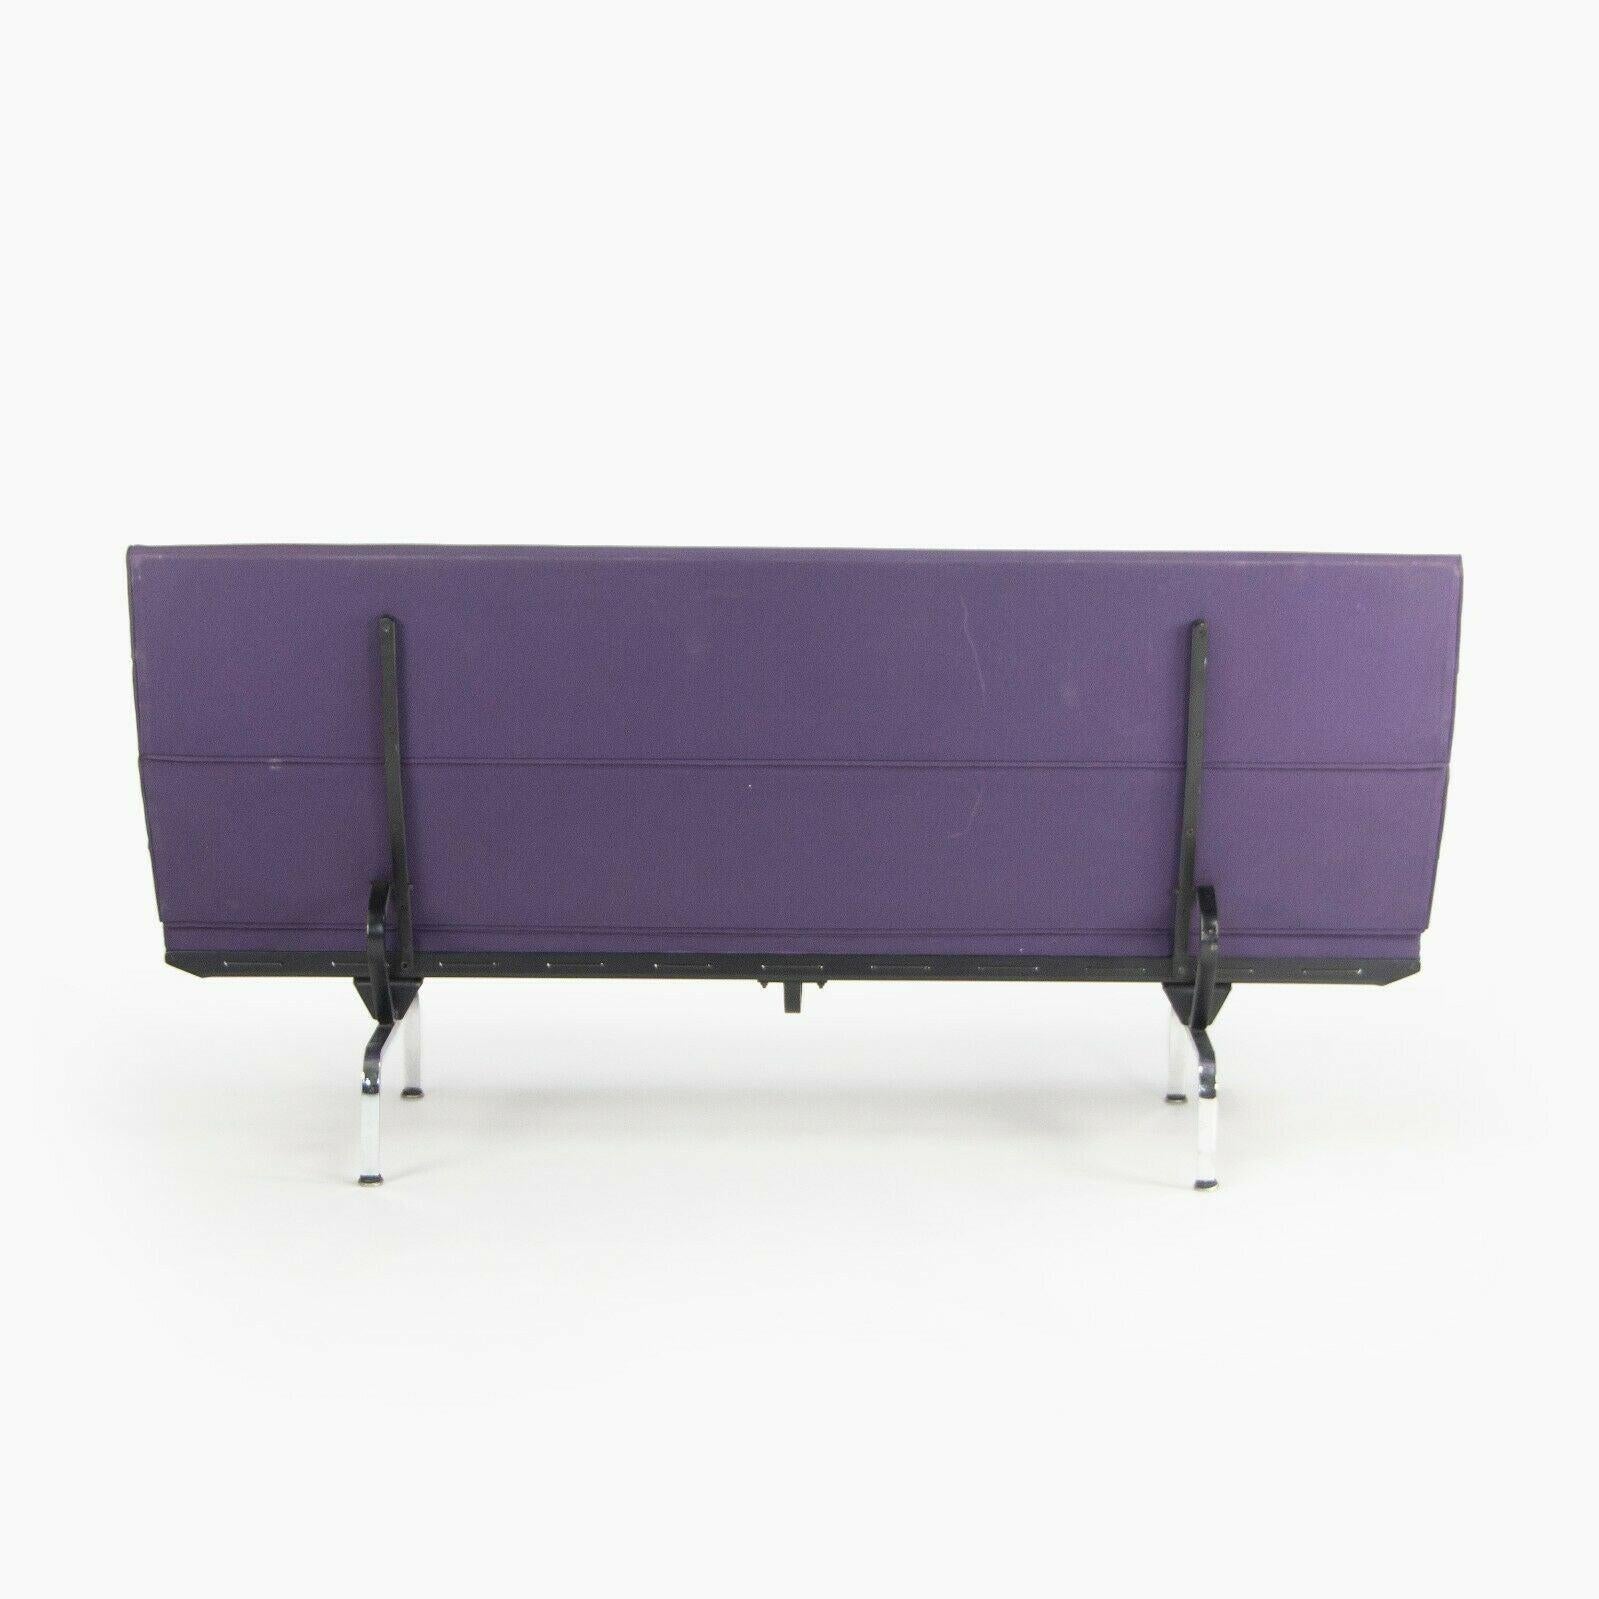 Modern 2006 Herman Miller Ray and Charles Eames Sofa Compact Purple Fabric Upholstery For Sale